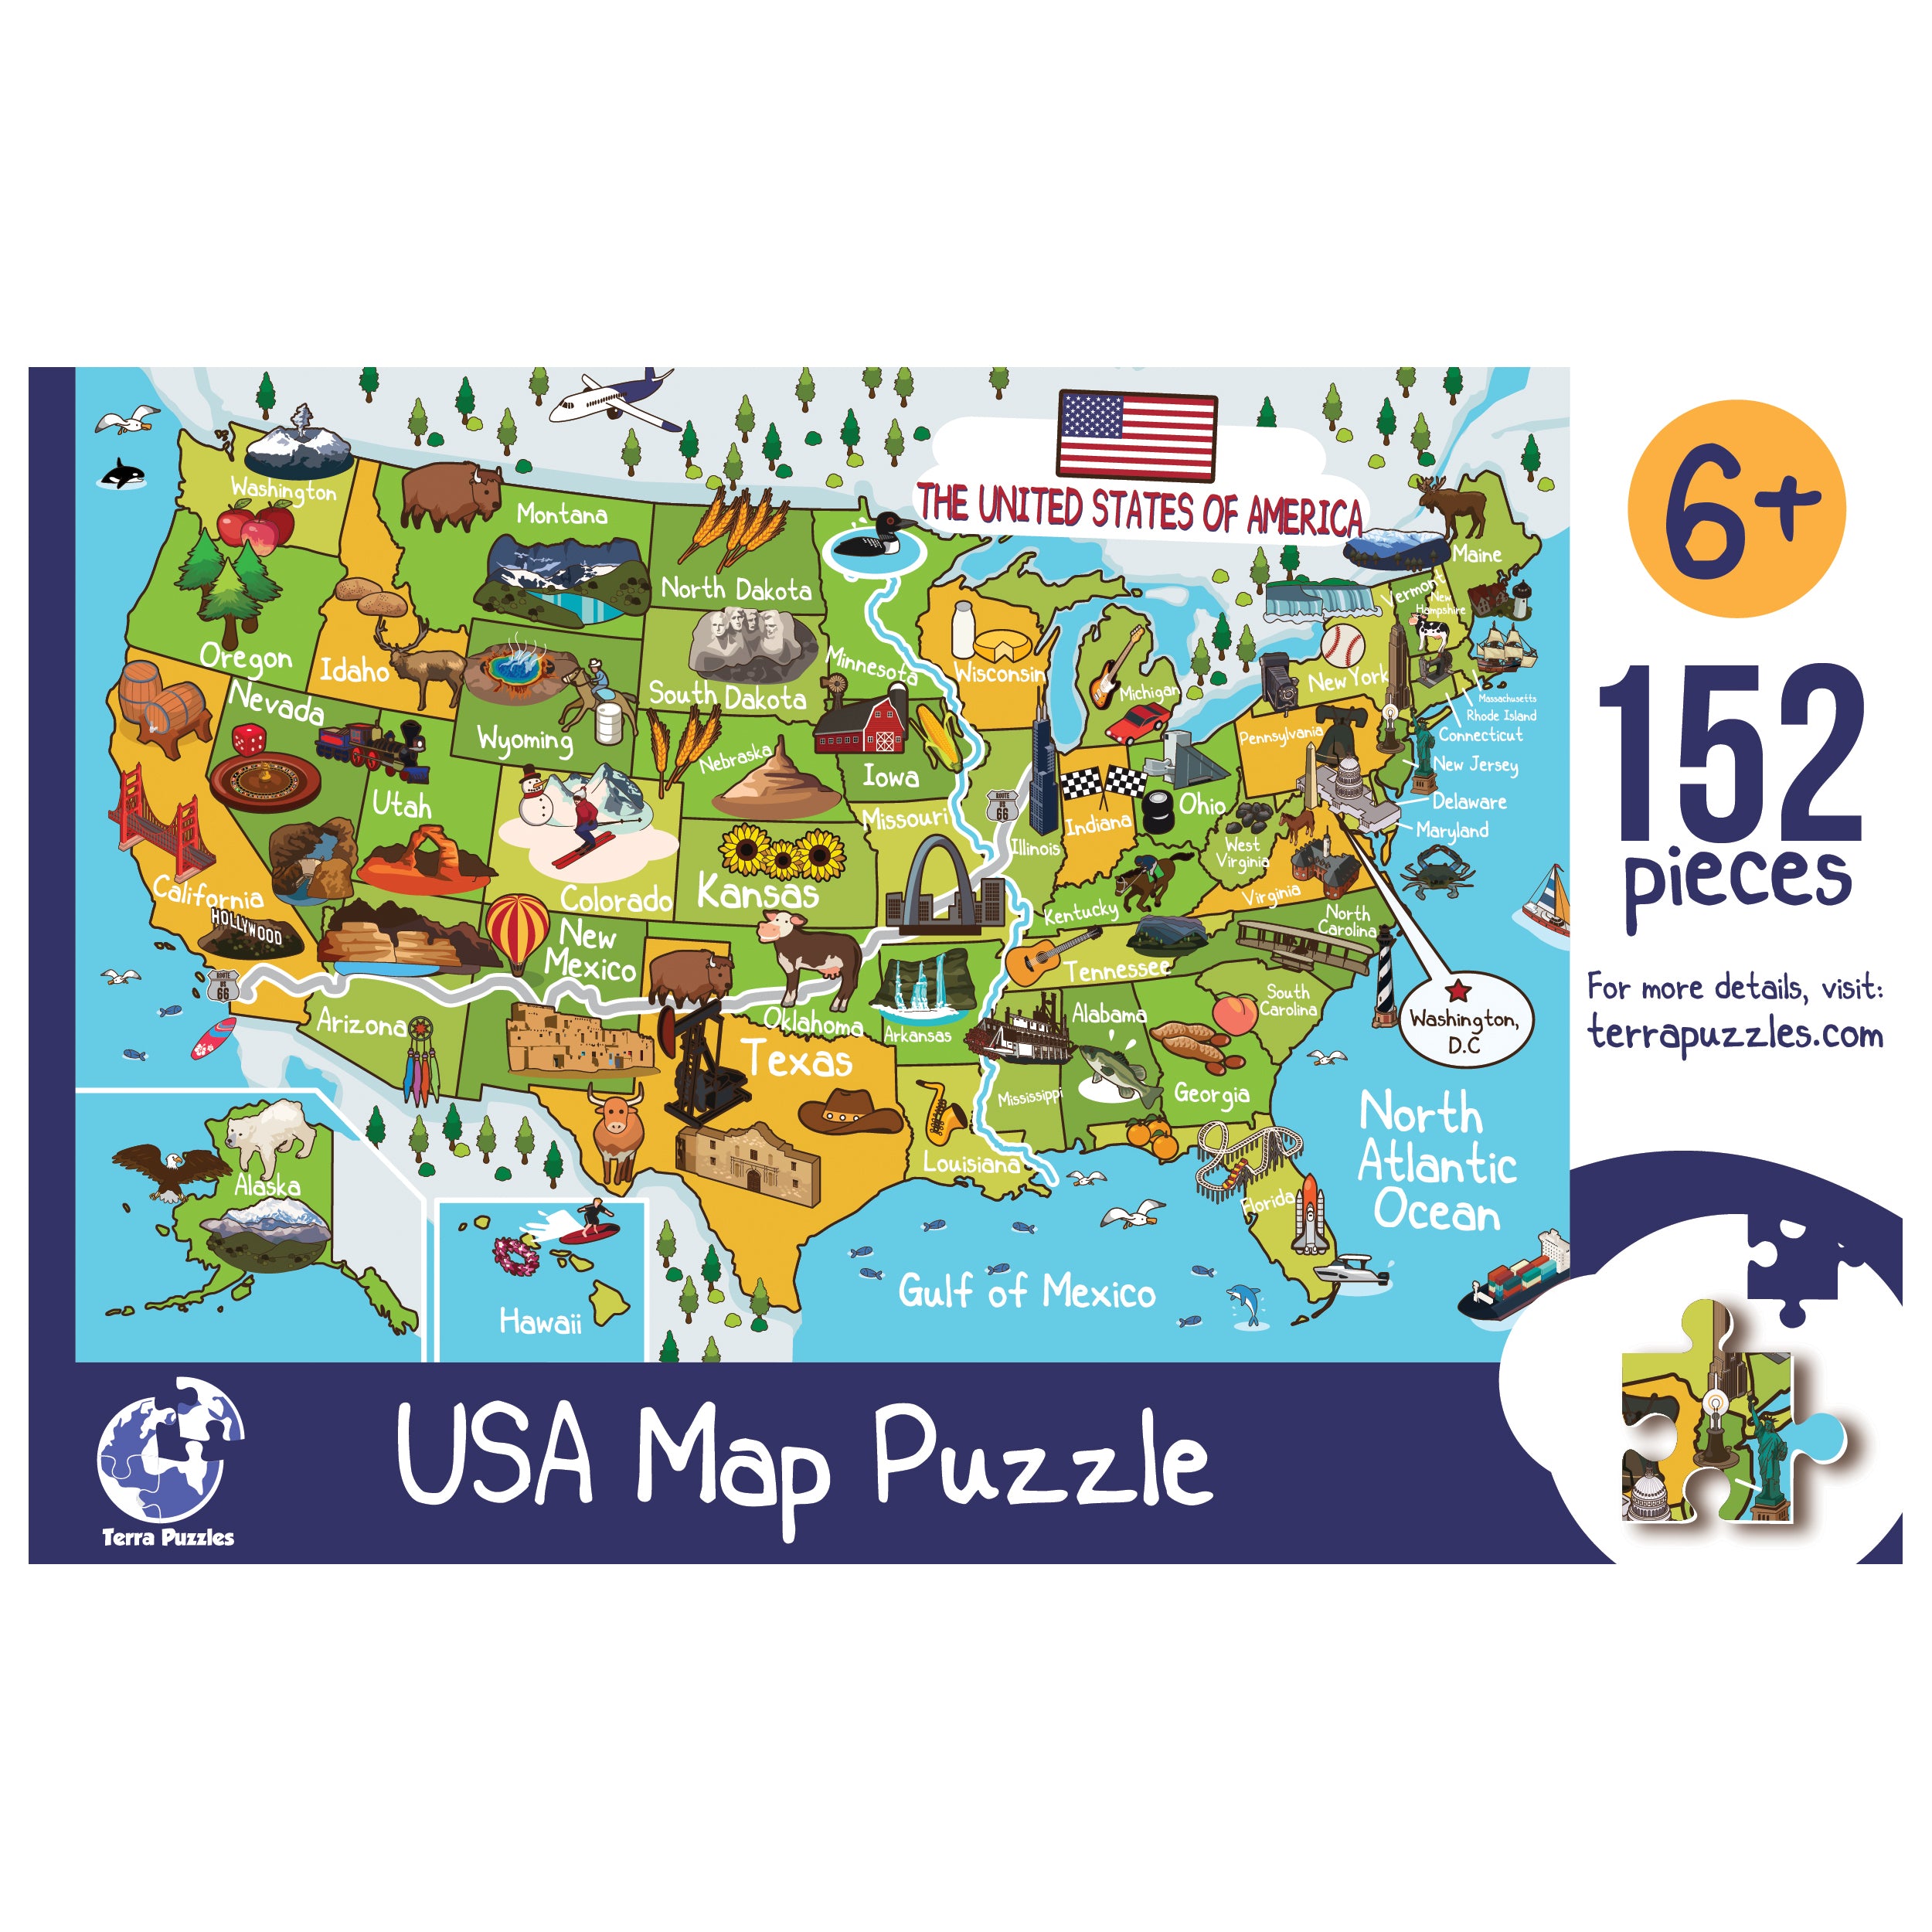 Terra Puzzles France Map Wooden Jigsaw Puzzle 152 Piece, 10x15 inches